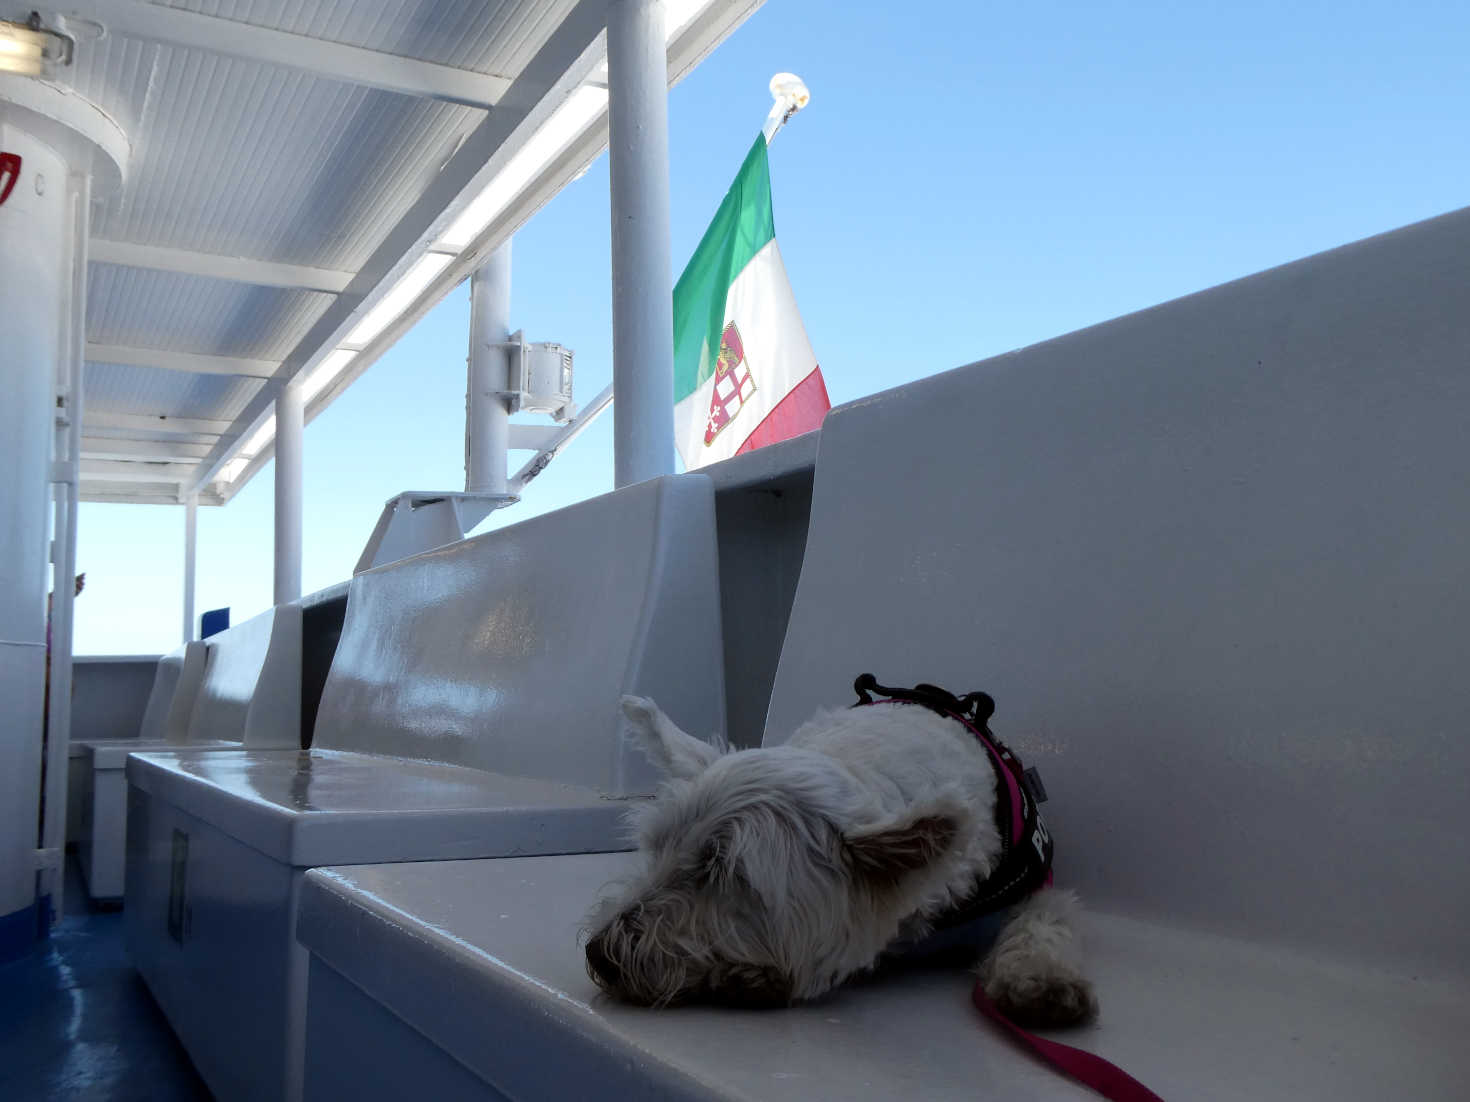 poppy the westie has a nap on ferry to Giglio